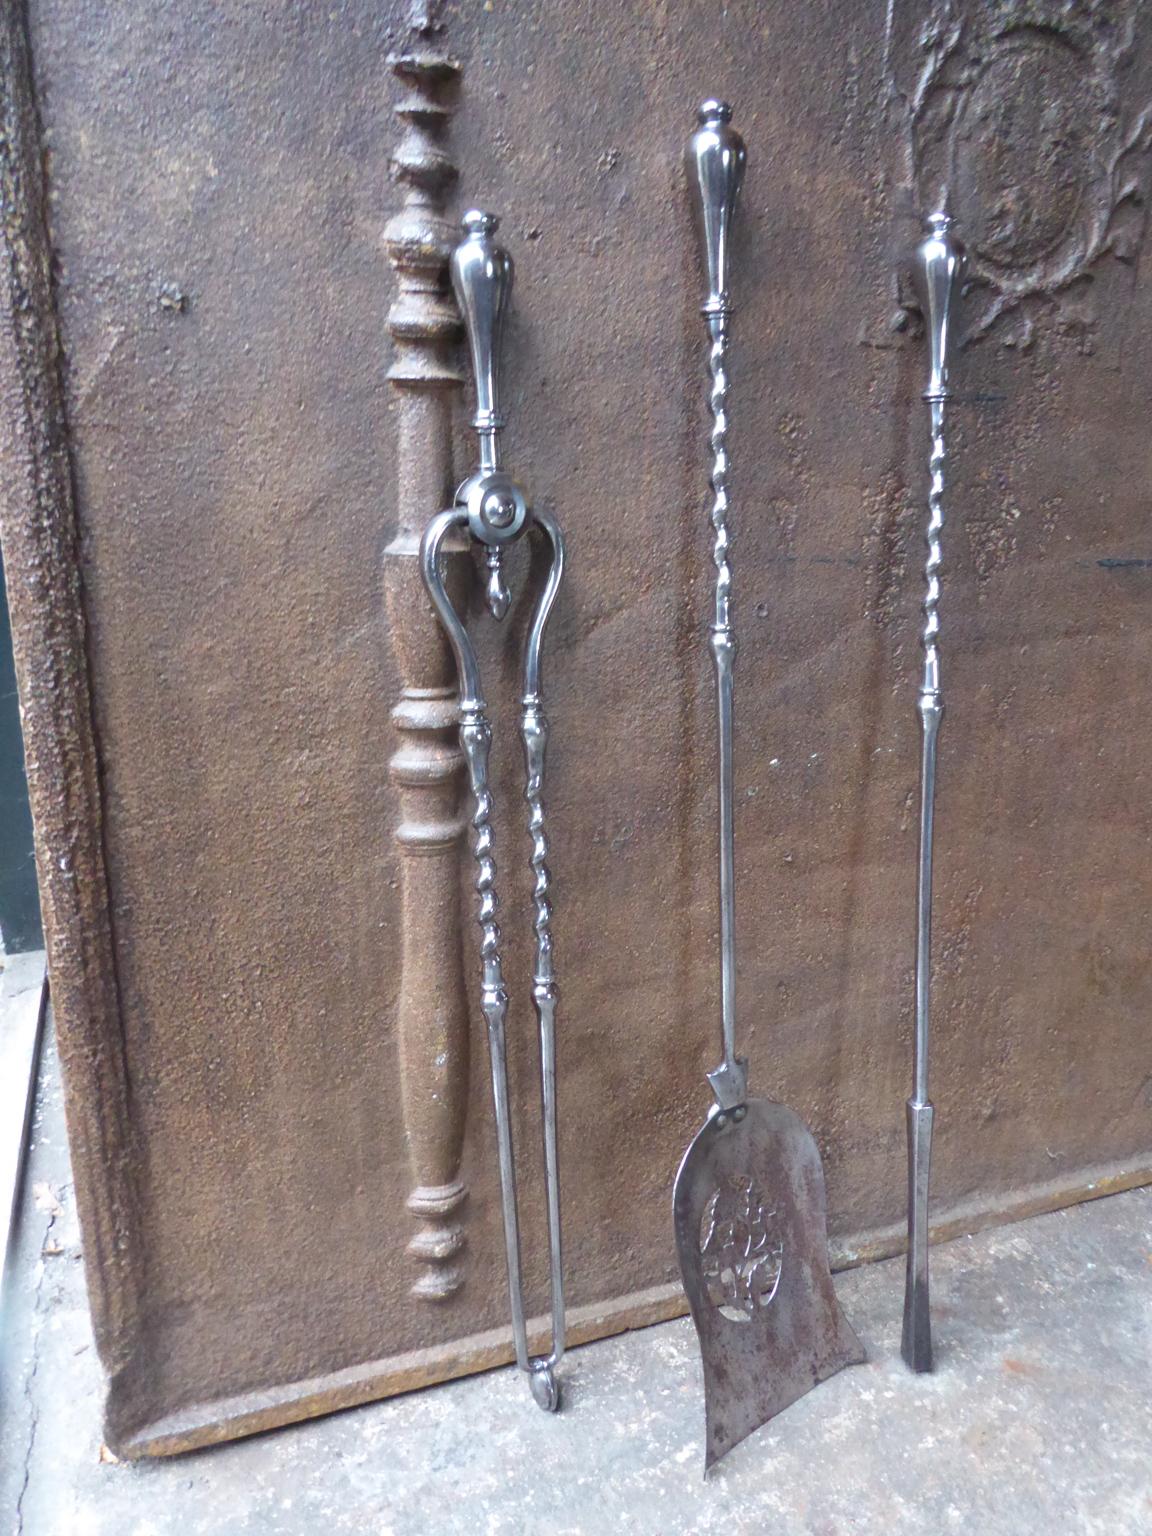 Beautiful set of three Georgian fireplace tools made of polished steel. Each with barley twist shafts
and with a finely pierced and cut shovel in a floral design, 18th-19th century. The fire tool set is in a good condition and is fully